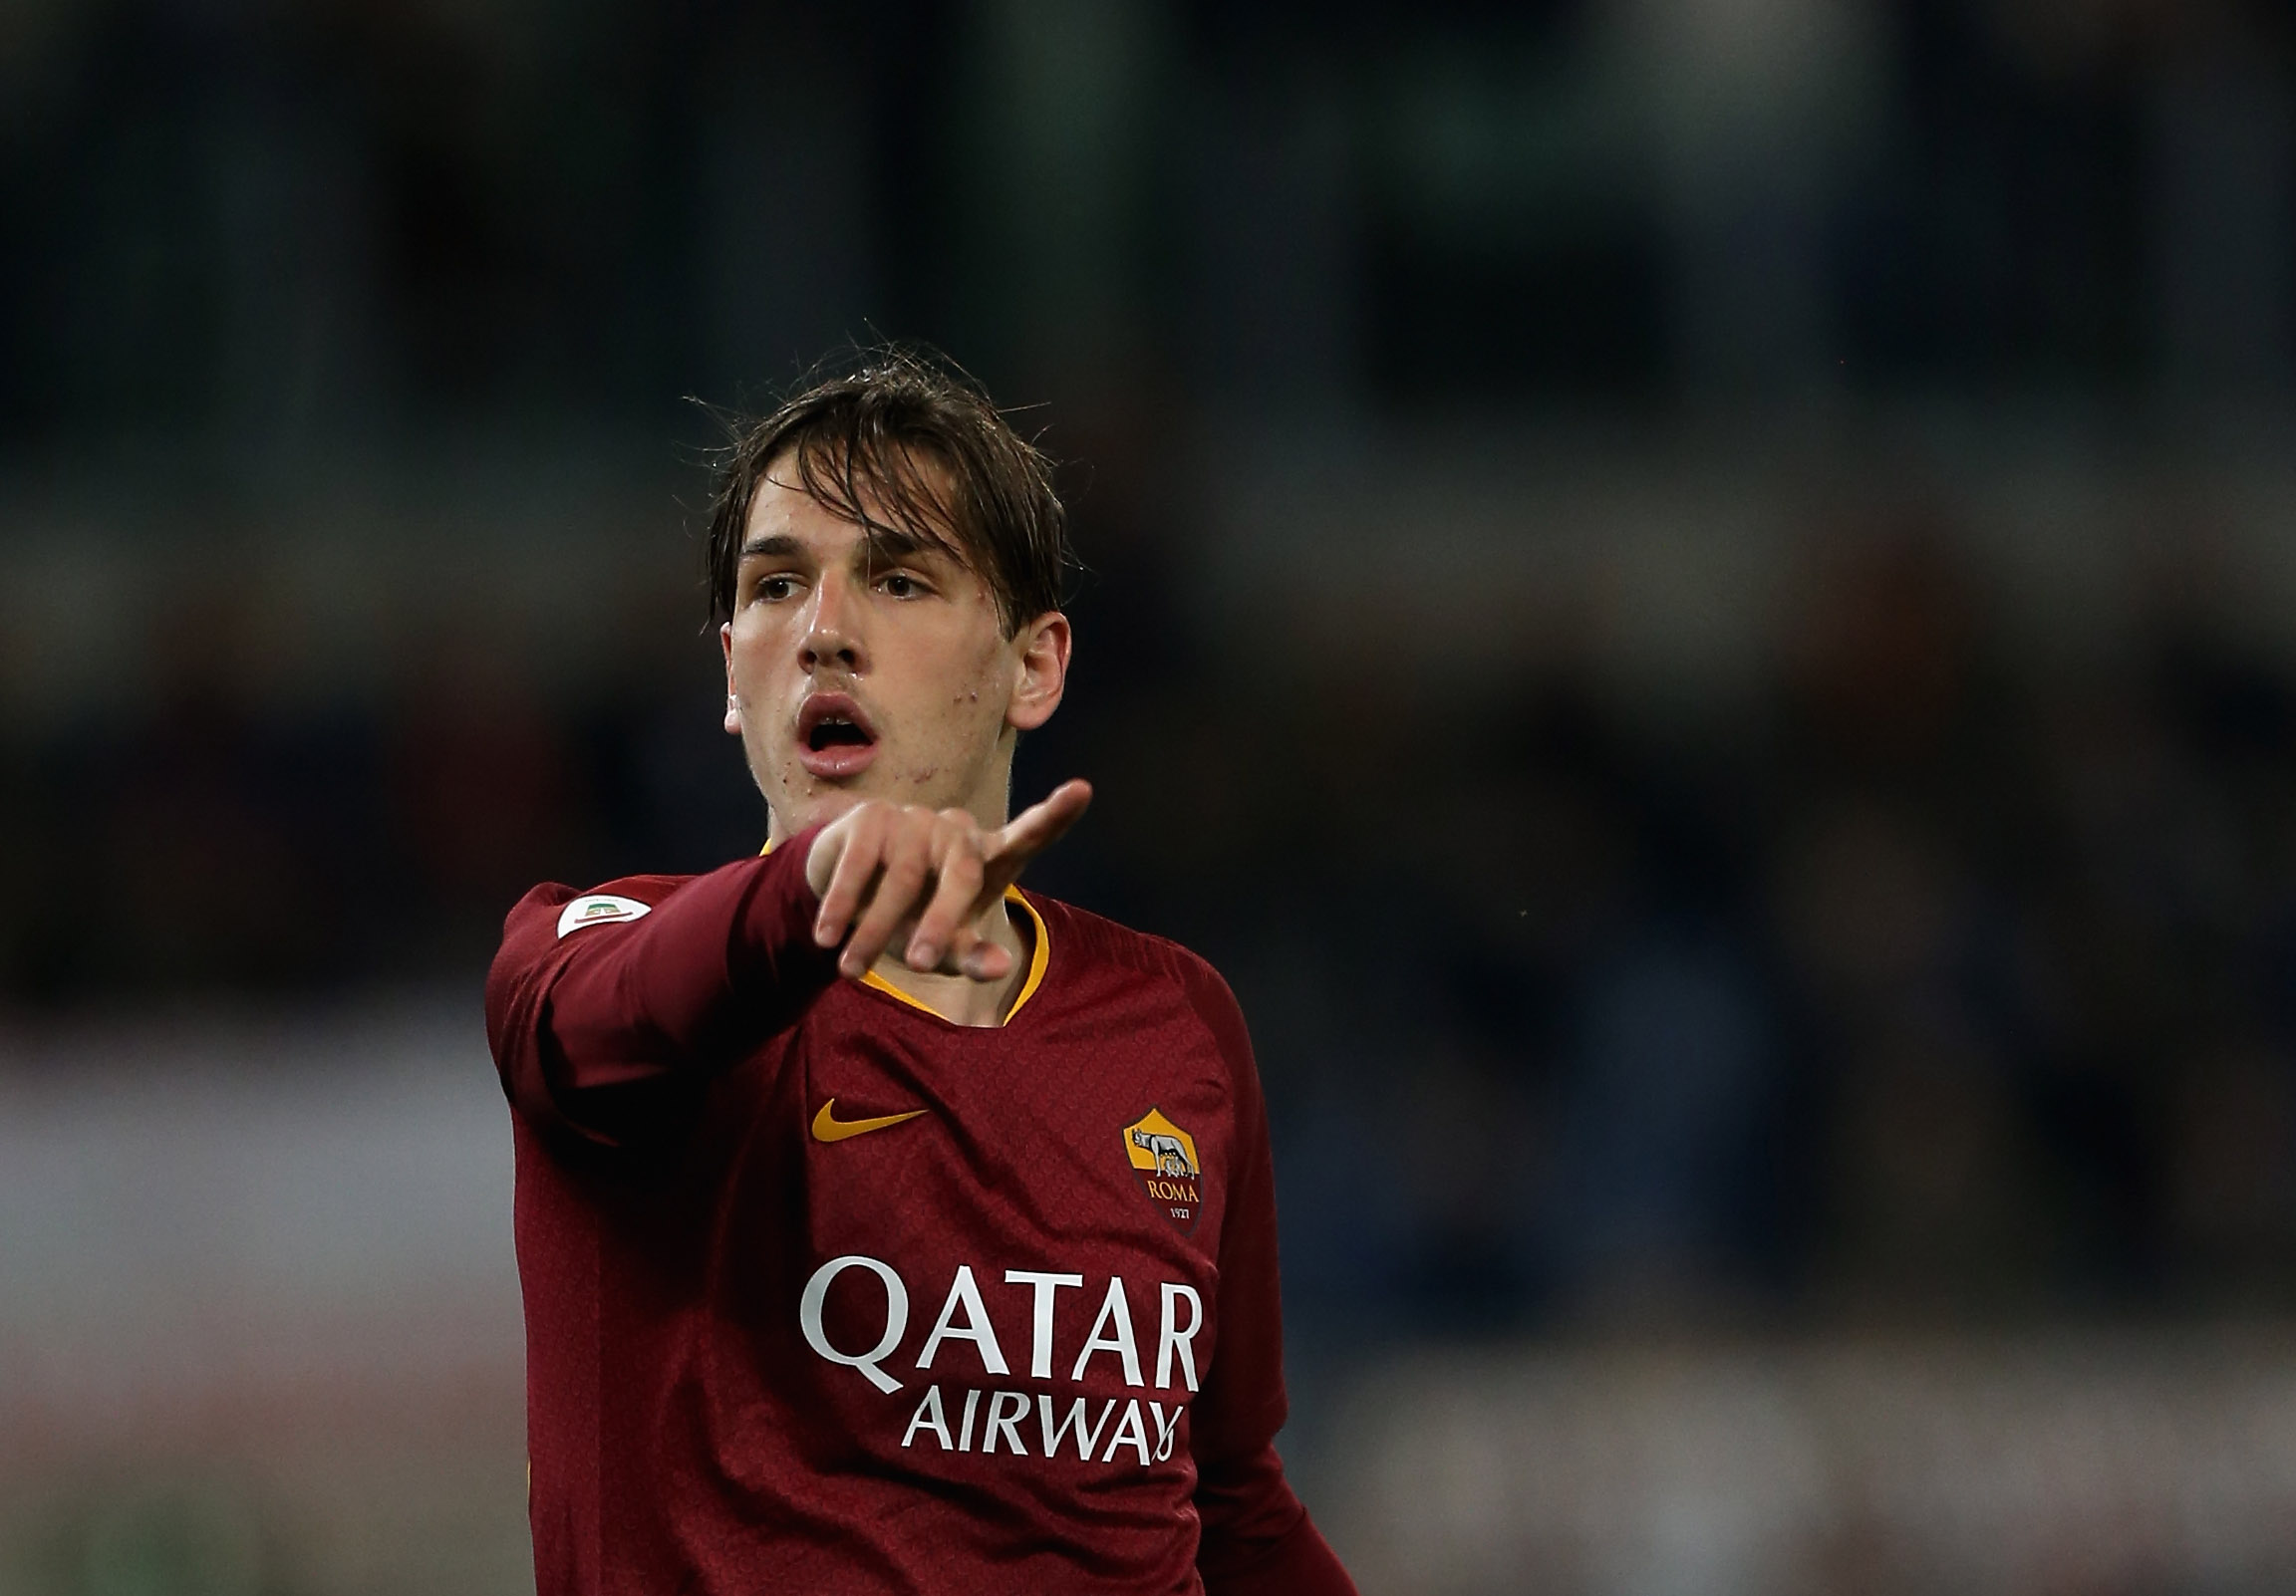 ROME, ITALY - APRIL 03:  Nicolo' Zaniolo of AS Roma gestures during the Serie A match between AS Roma and ACF Fiorentina at Stadio Olimpico on April 3, 2019 in Rome, Italy.  (Photo by Paolo Bruno/Getty Images)